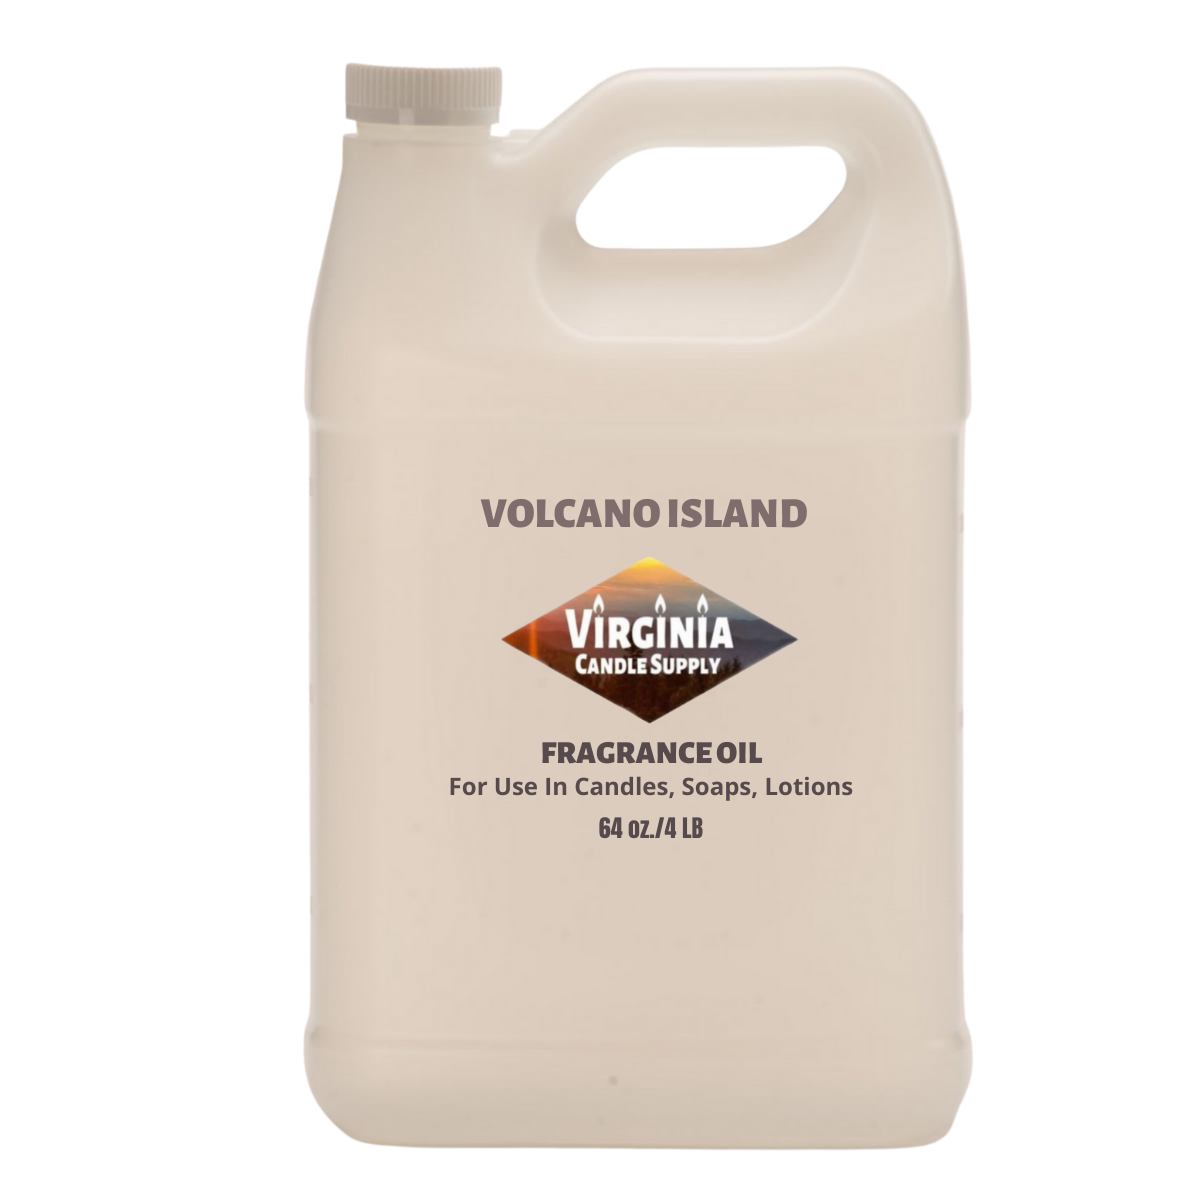 Volcano Island Fragrance Oil (Our Version of The Brand Name) (8 LB Jug) for Candle  Making, Soap Making, Tart Making, Room Sprays, Lotions, Car Fresheners,  Slime, Bath Bombs, Warmers